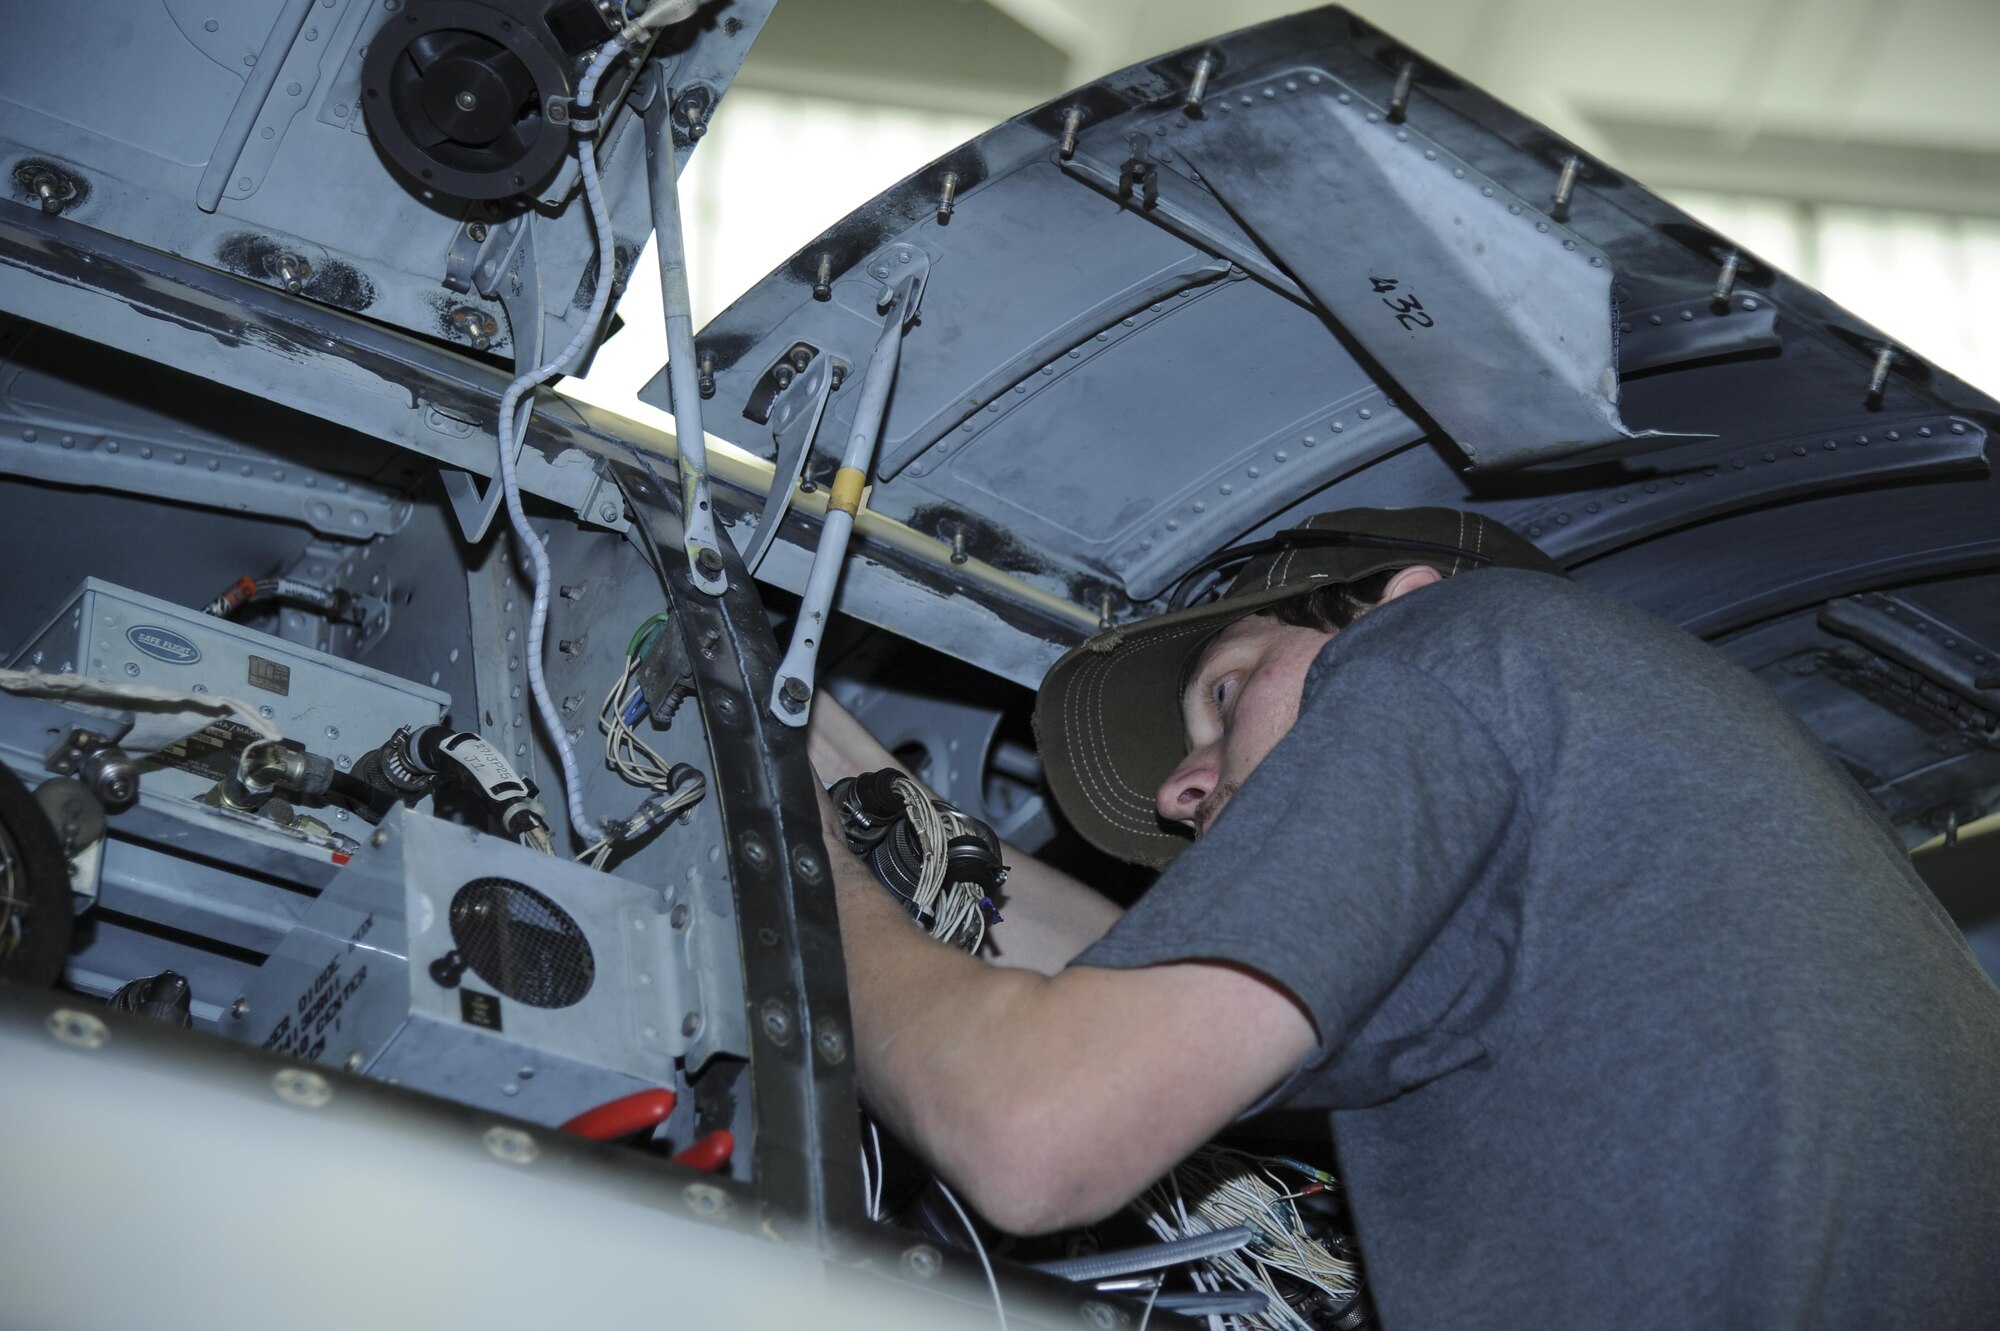 Aaron Miller, 309th Aircraft Maintenance and Regeneration Group aircraft technician, installs a wiring harness for a lightweight airborne recovery system into an A-10C Thunderbolt II at Davis-Monthan Air Force Base, Ariz., Dec. 5, 2016. The LARS V-12 is designed to allow A-10 pilots a more effective means of communication with individuals on the ground such as downed pilots, pararescuemen and joint terminal attack controllers. (U.S. Air Force photo by Airman 1st Class Mya M. Crosby)